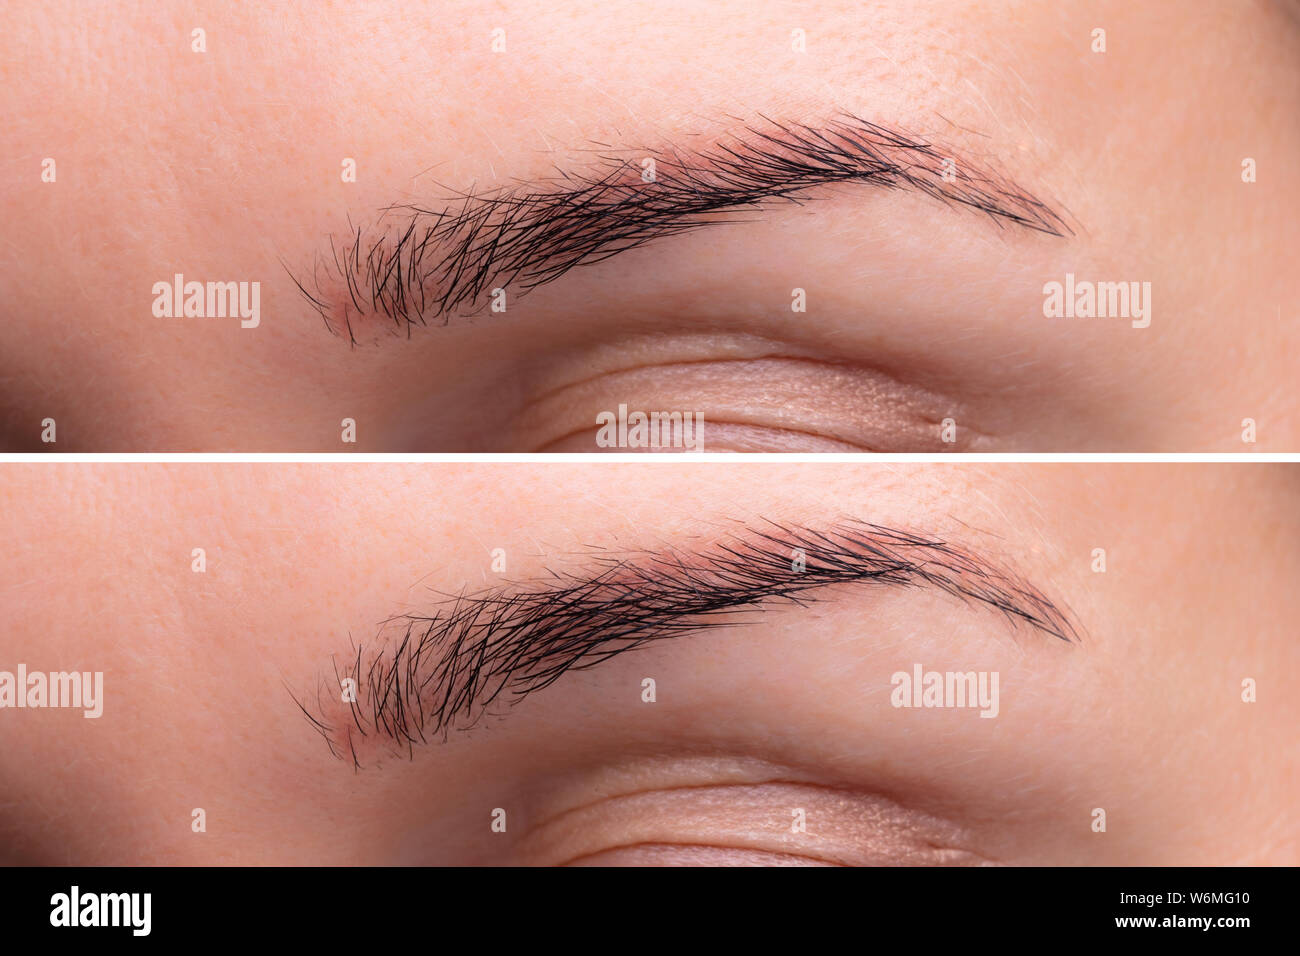 Before And After Endoscopic Eyebrow Lifting Procedure Stock Photo